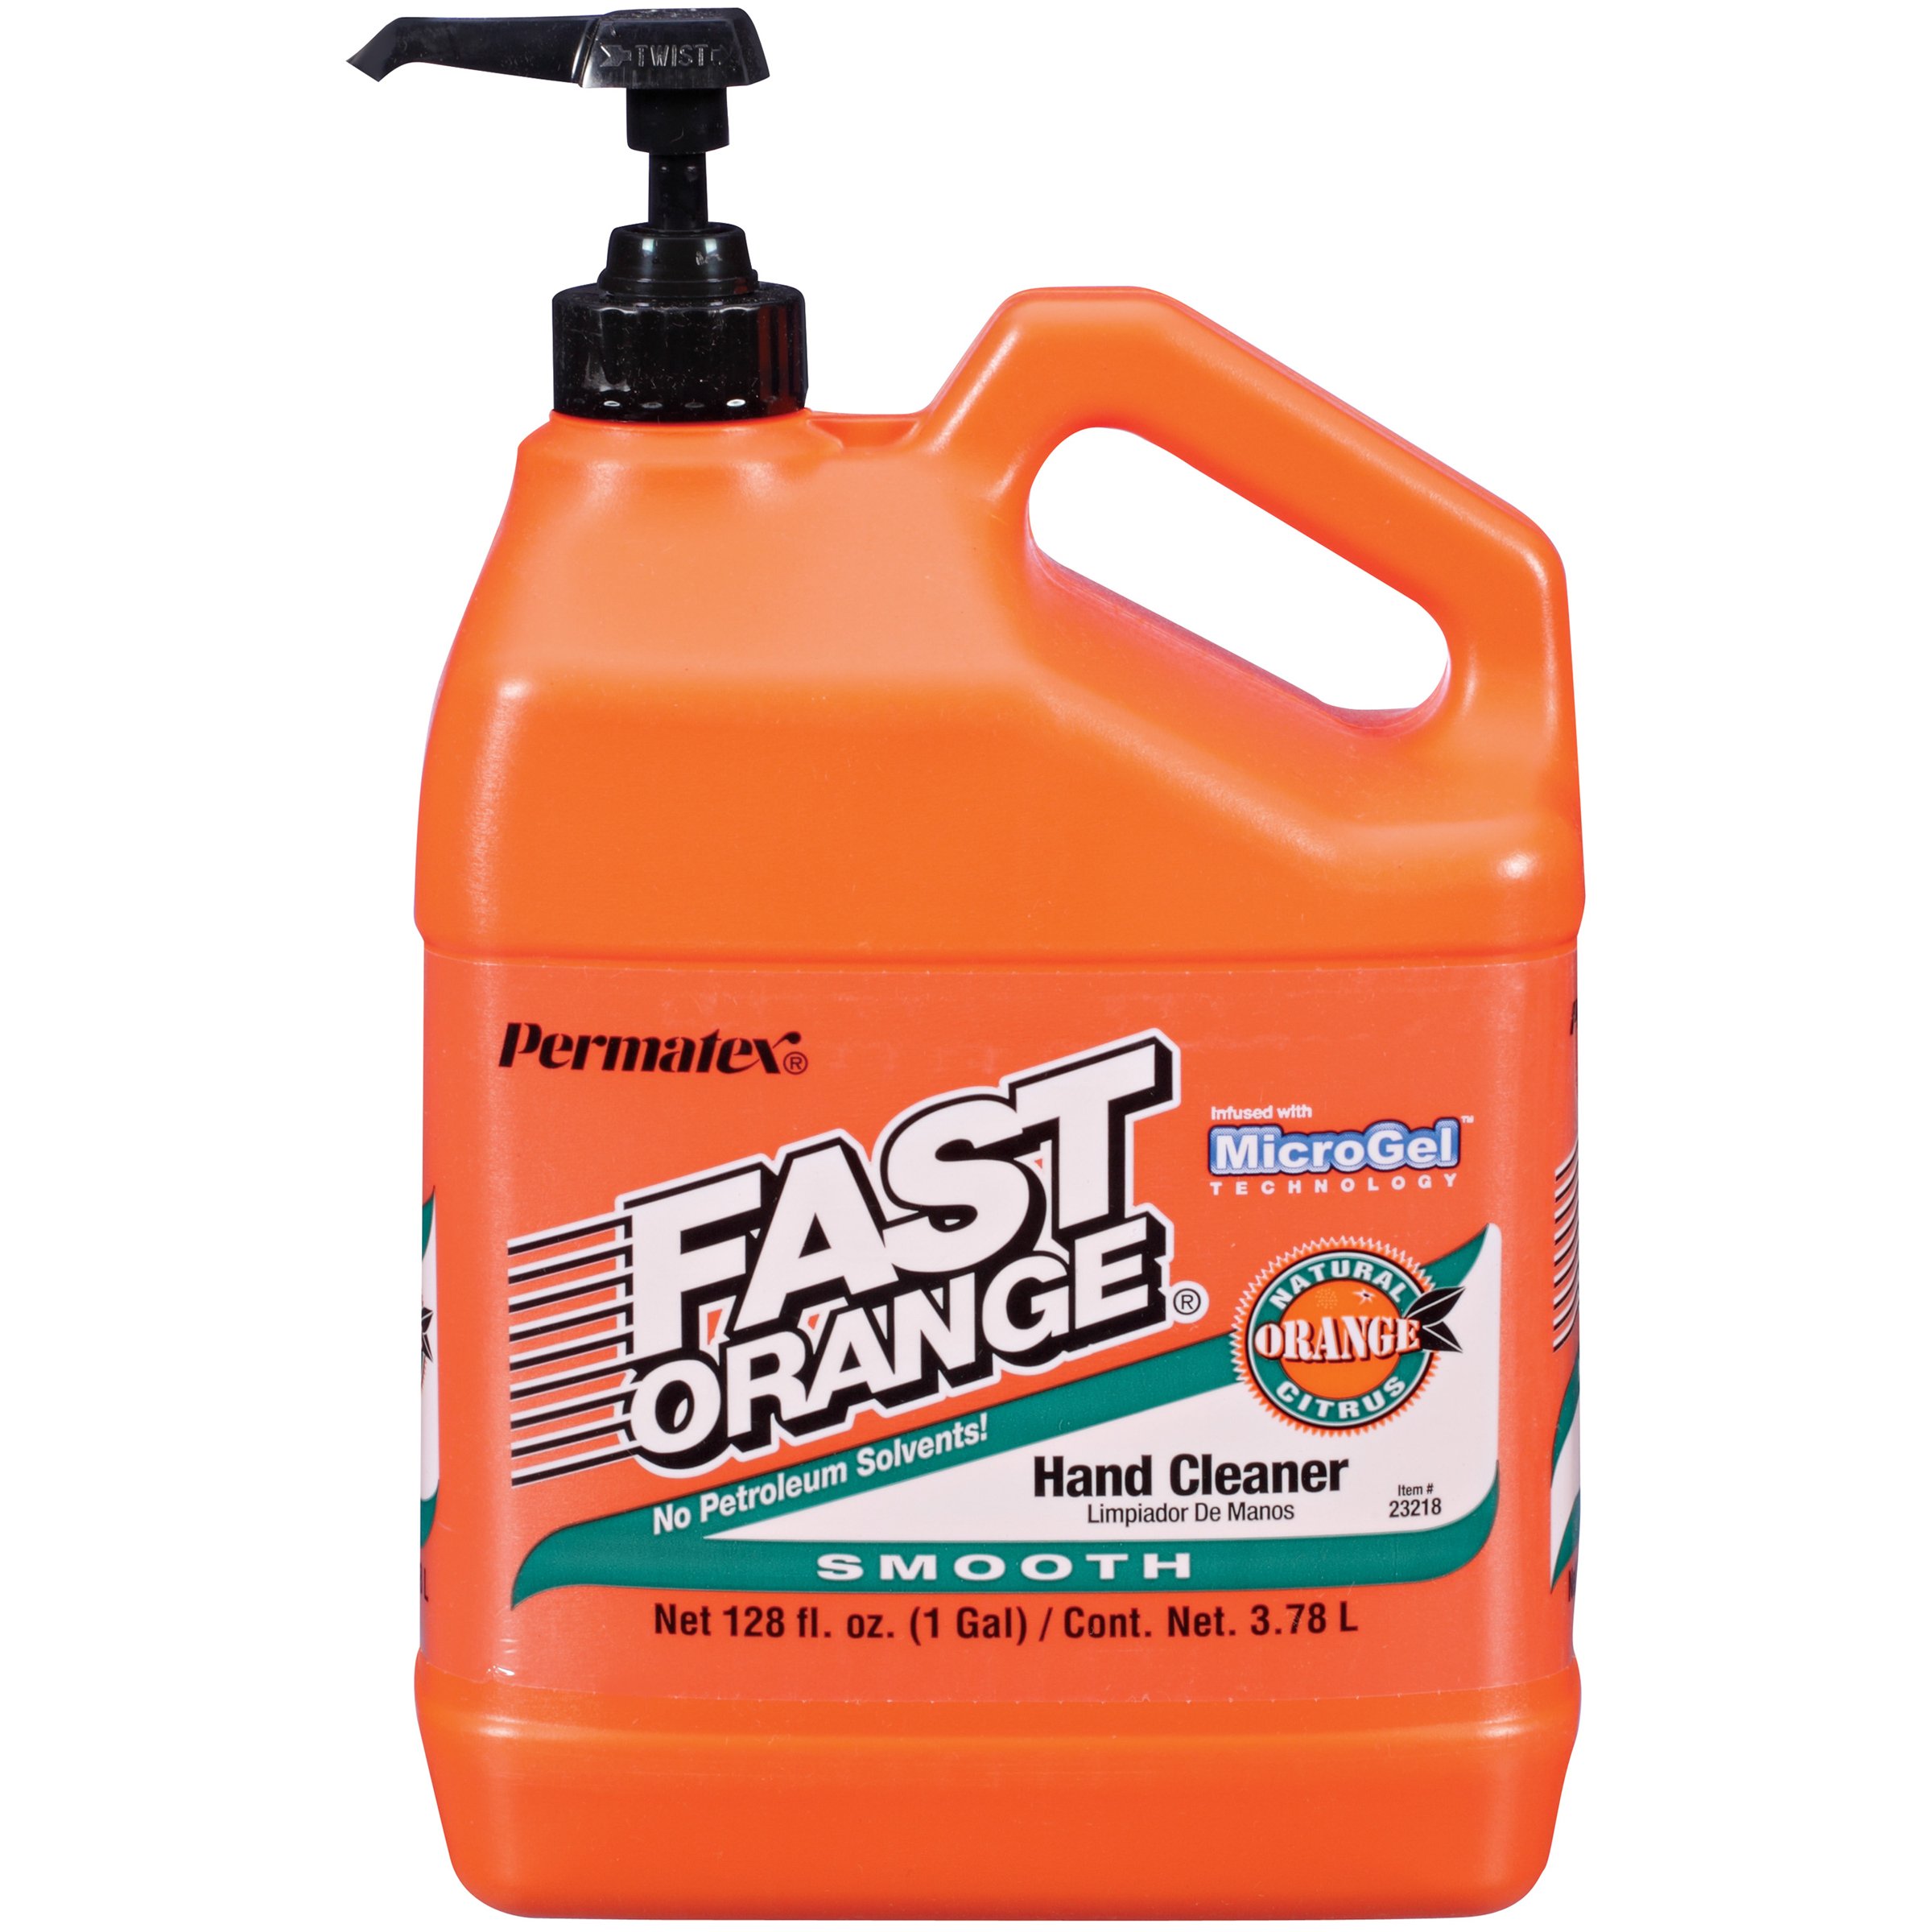 4-Pack 1-Gallon Permatex Fast Orange Smooth Lotion Hand Cleaner with Pump $30.28 ($7.57/gallon) + Free Shipping w/ Prime or on $35+